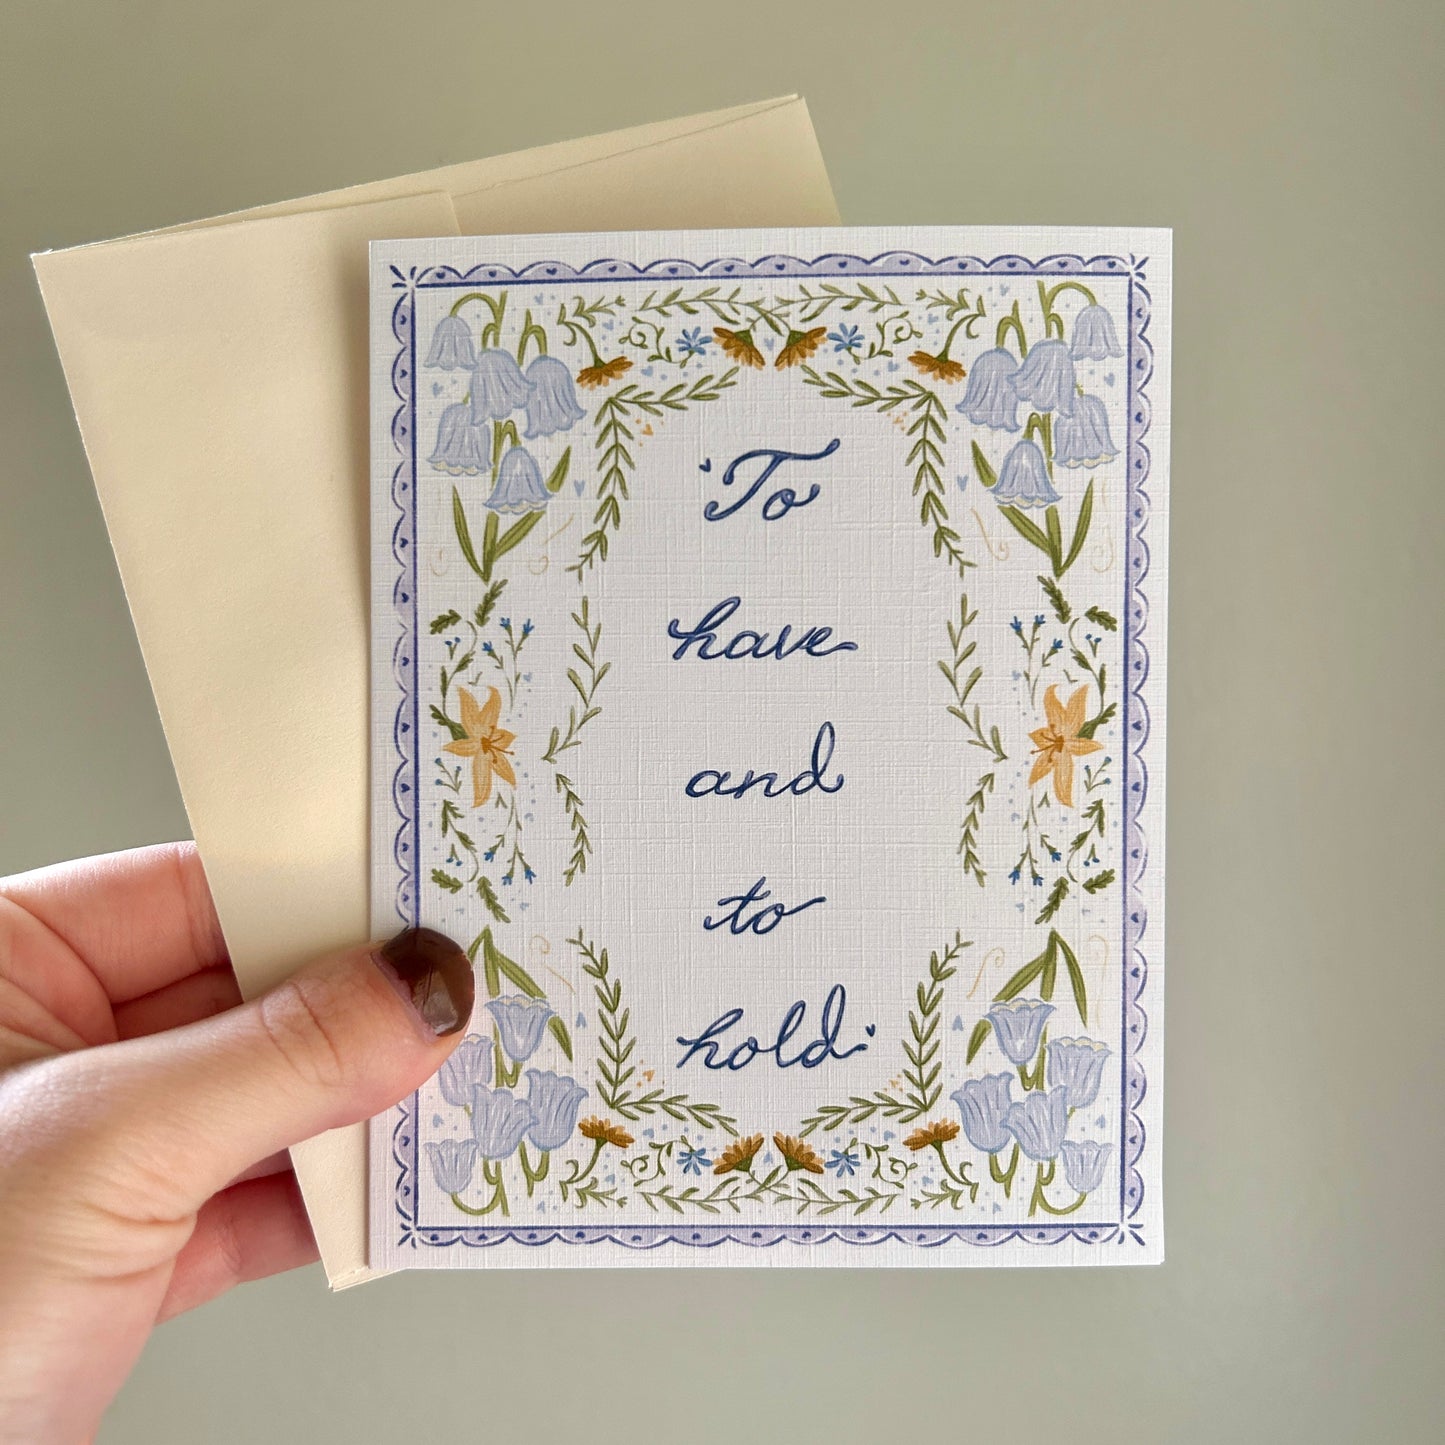 Wedding Card - “To Have and To Hold”